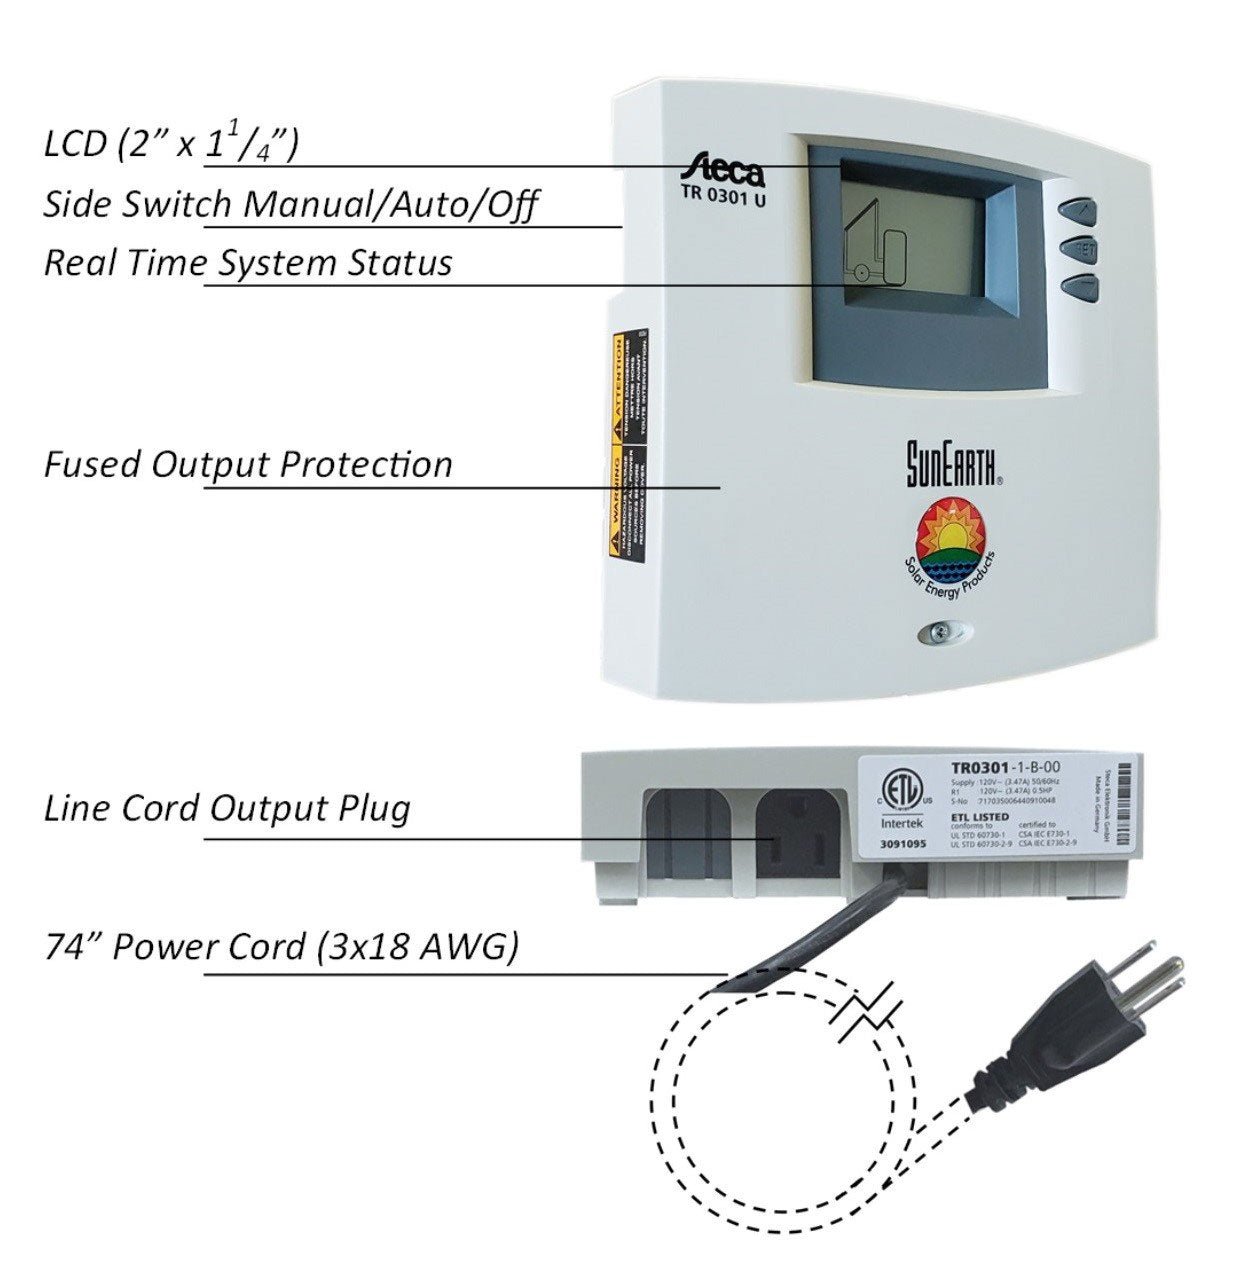 SETR0301U - Controller for Solar Water Heaters